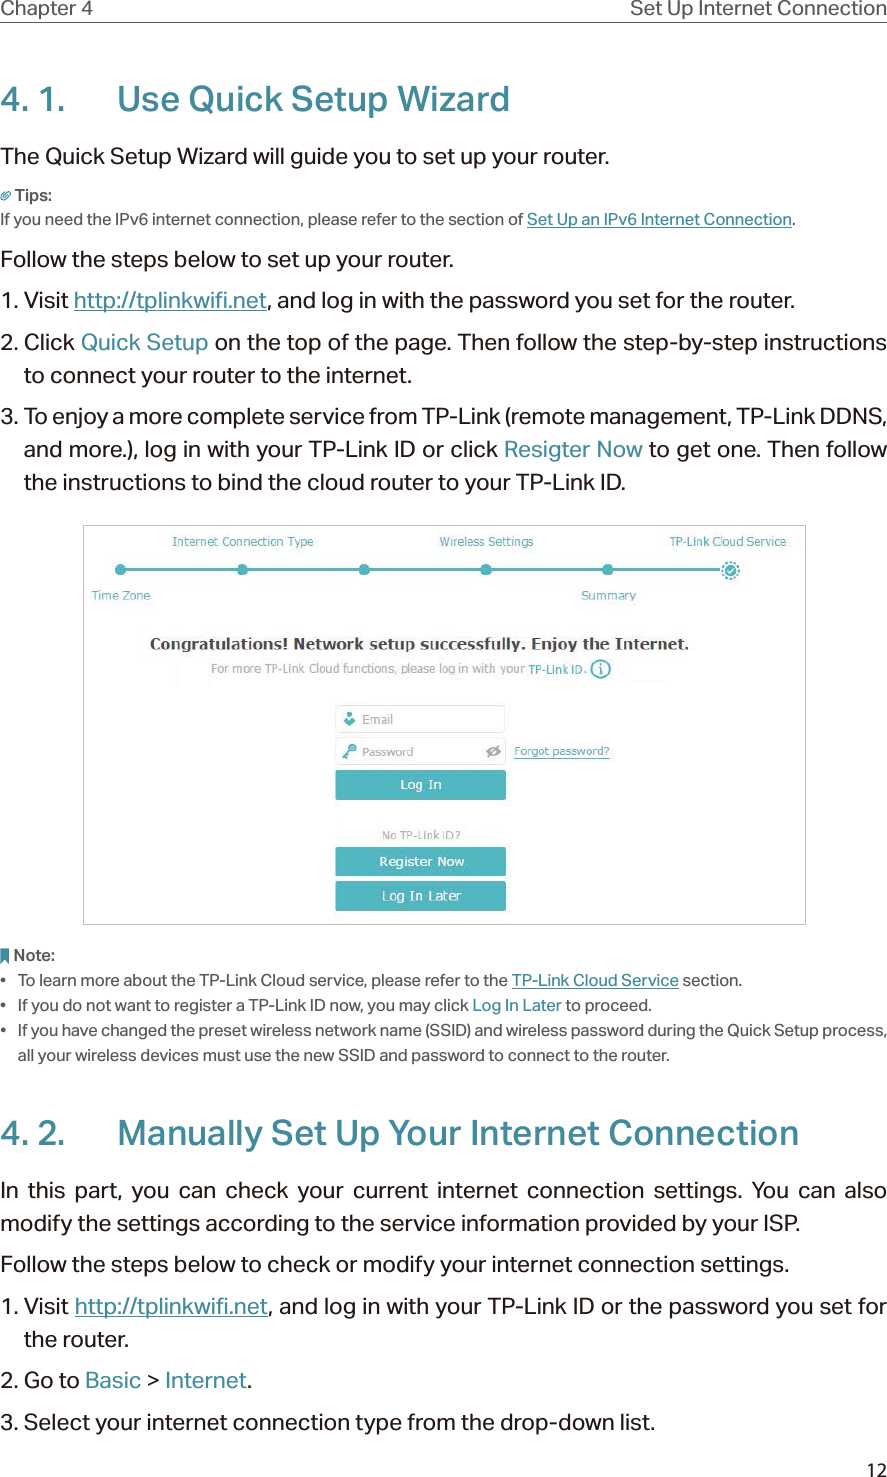 12Chapter 4 Set Up Internet Connection4. 1.  Use Quick Setup WizardThe Quick Setup Wizard will guide you to set up your router.Tips:If you need the IPv6 internet connection, please refer to the section of Set Up an IPv6 Internet Connection.Follow the steps below to set up your router.1. Visit http://tplinkwifi.net, and log in with the password you set for the router.2. Click Quick Setup on the top of the page. Then follow the step-by-step instructions to connect your router to the internet.3. To enjoy a more complete service from TP-Link (remote management, TP-Link DDNS, and more.), log in with your TP-Link ID or click Resigter Now to get one. Then follow the instructions to bind the cloud router to your TP-Link ID.Note:•  To learn more about the TP-Link Cloud service, please refer to the TP-Link Cloud Service section.•  If you do not want to register a TP-Link ID now, you may click Log In Later to proceed.•  If you have changed the preset wireless network name (SSID) and wireless password during the Quick Setup process, all your wireless devices must use the new SSID and password to connect to the router.4. 2.  Manually Set Up Your Internet Connection In this part, you can check your current internet connection settings. You can also modify the settings according to the service information provided by your ISP.Follow the steps below to check or modify your internet connection settings.1. Visit http://tplinkwifi.net, and log in with your TP-Link ID or the password you set for the router.2. Go to Basic &gt; Internet.3. Select your internet connection type from the drop-down list. 